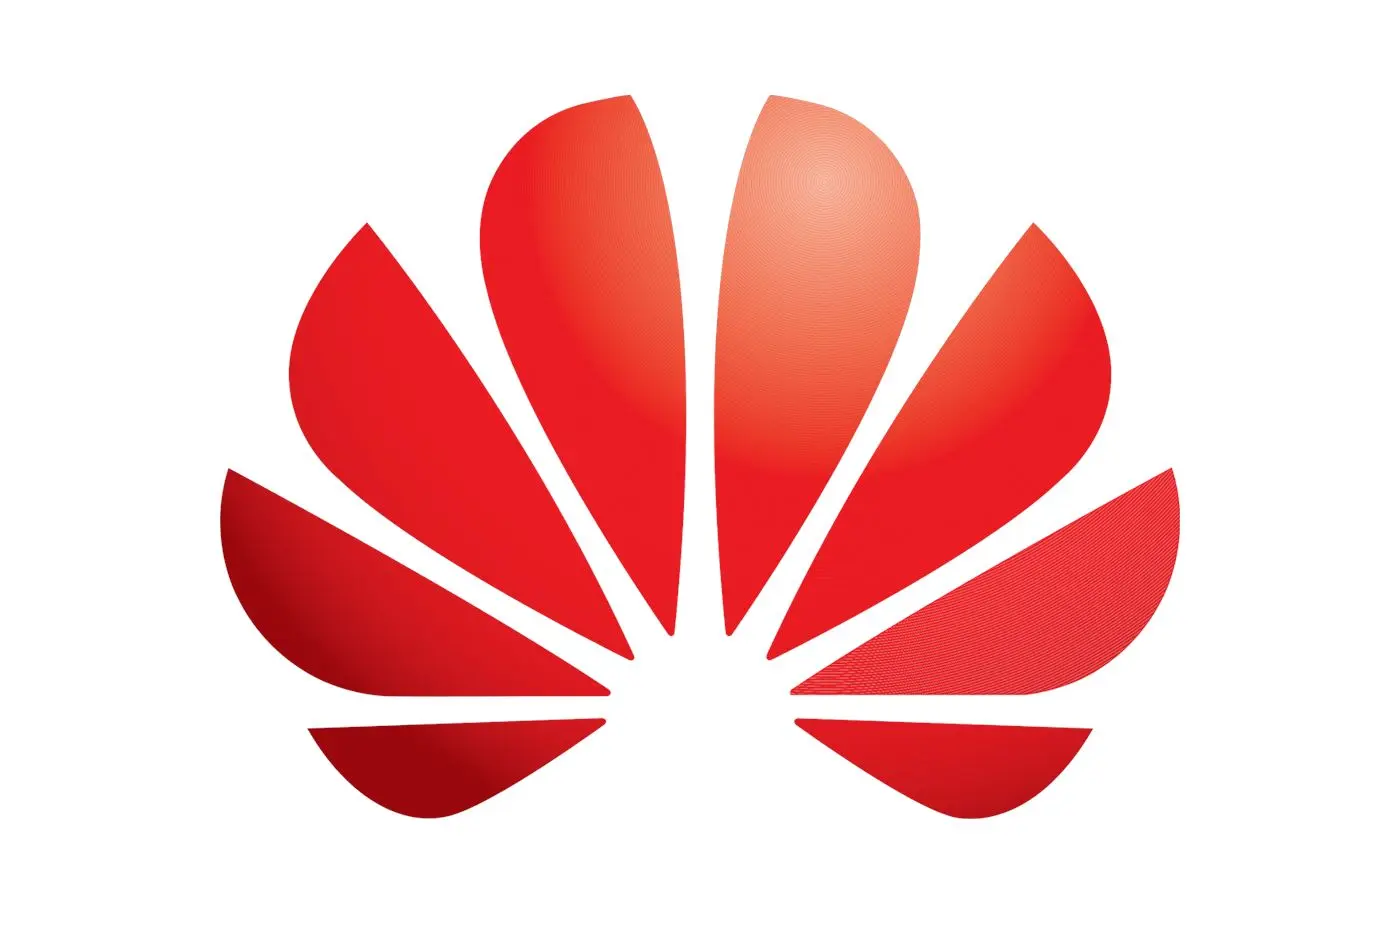 Google supprime la licence Android de Huawei